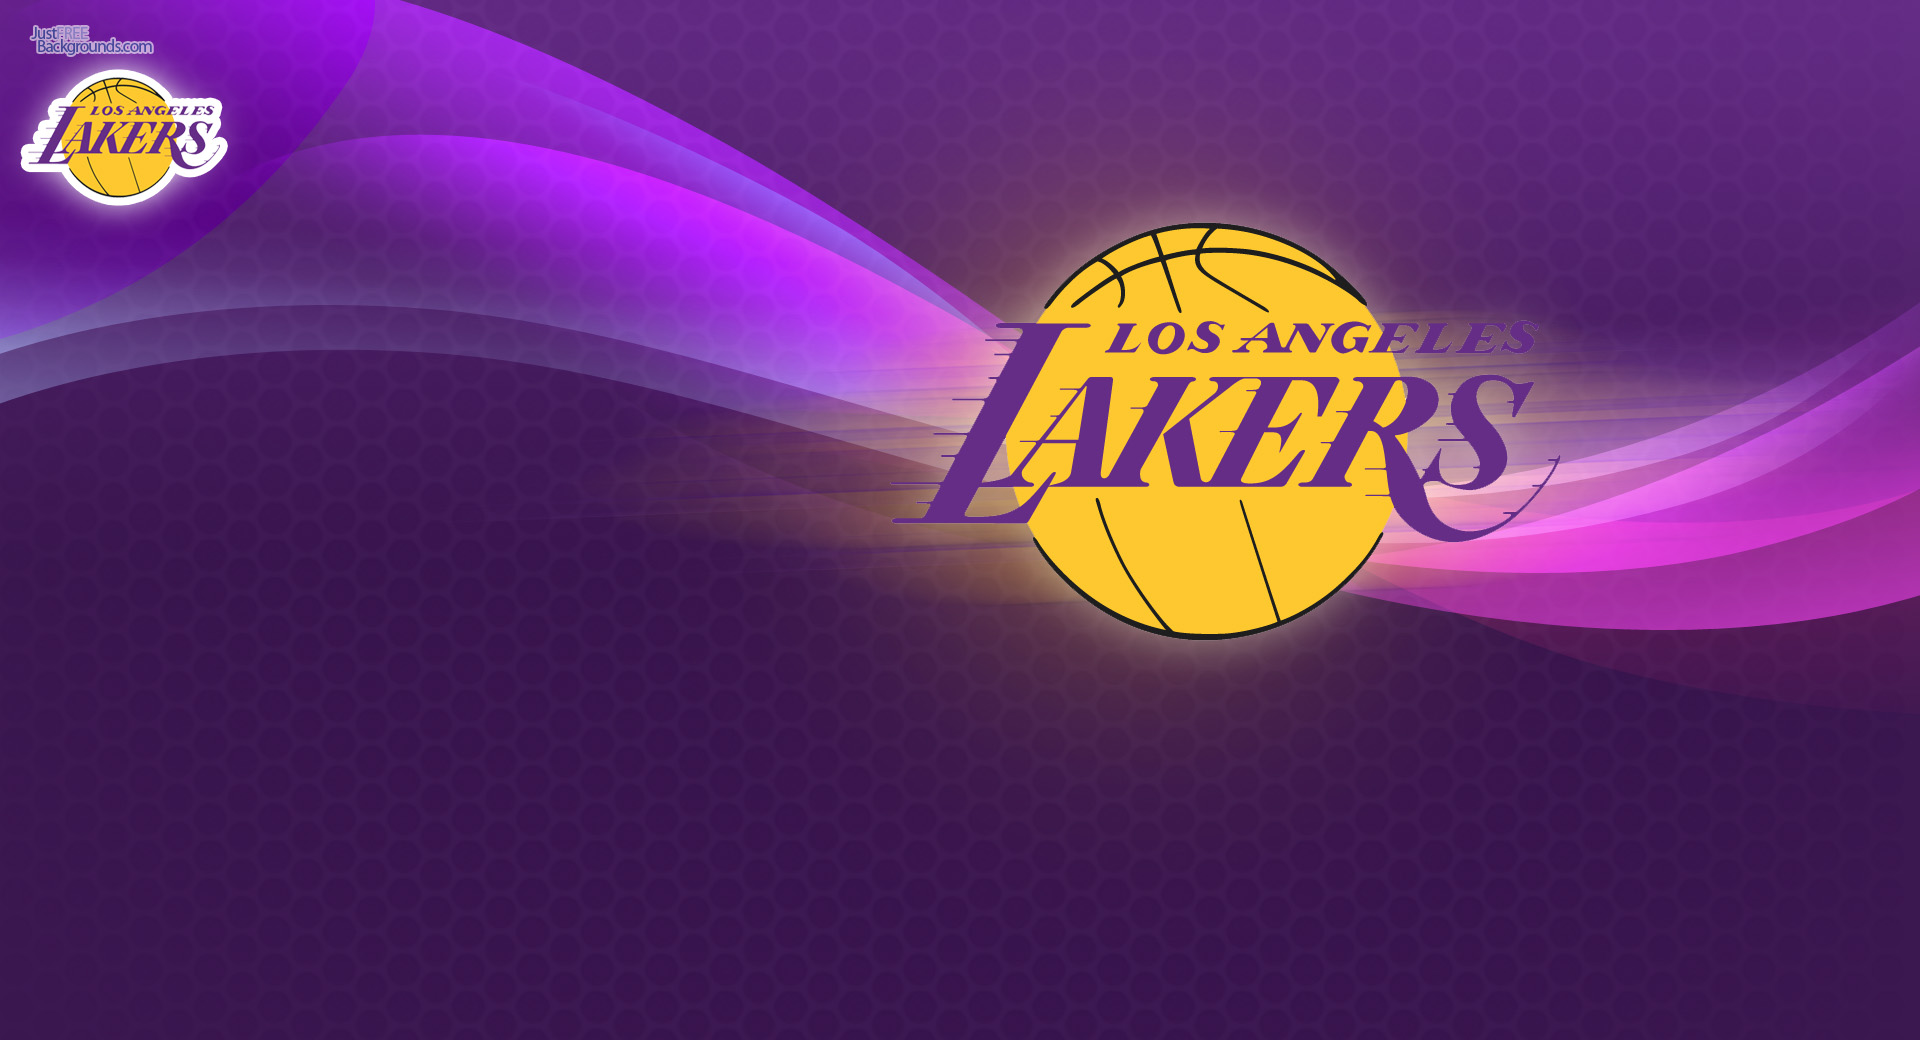  this new Los Angeles Lakers desktop background Escudo wallpapers